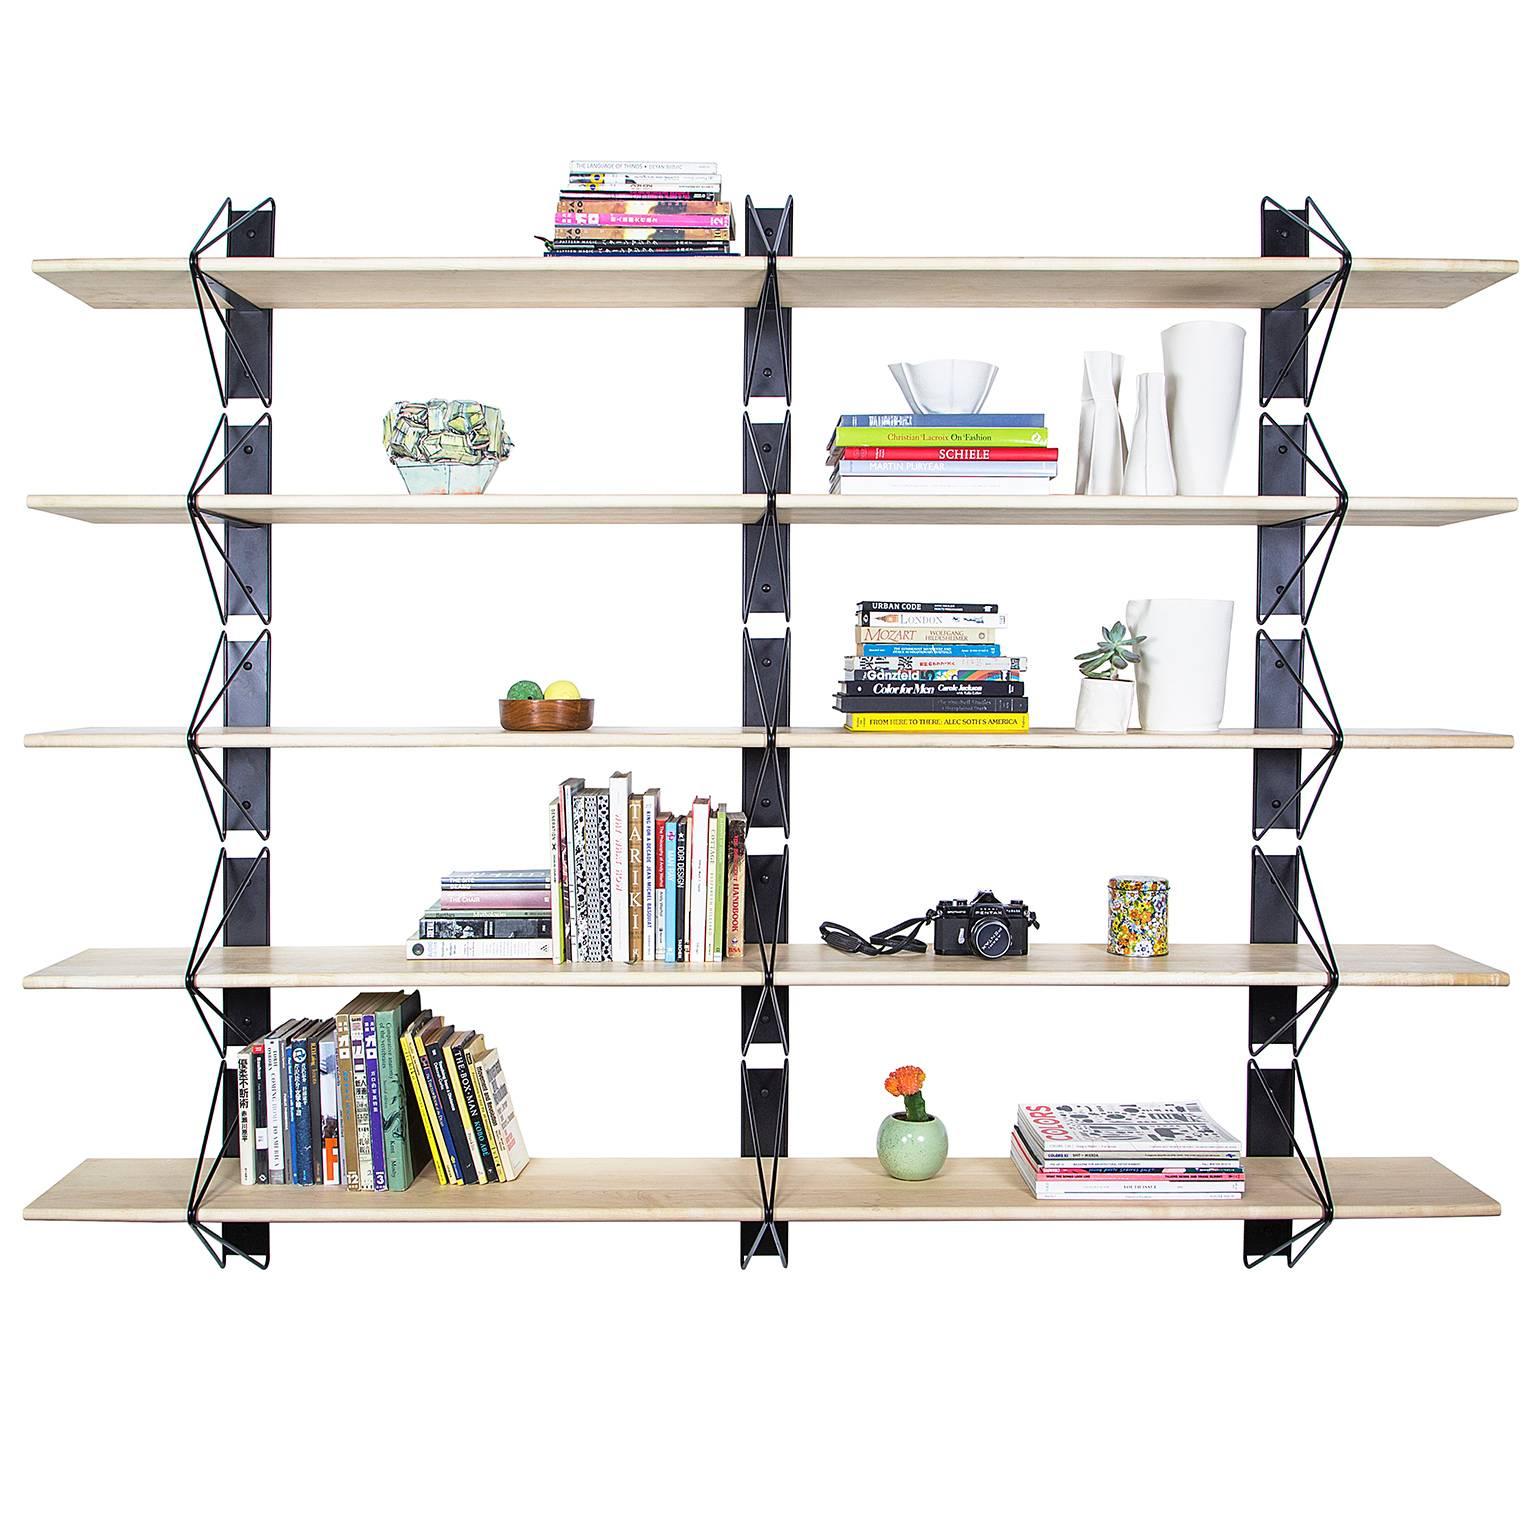 American Set of 5 Strut Shelves from Souda, Black and Walnut, Made to Order For Sale